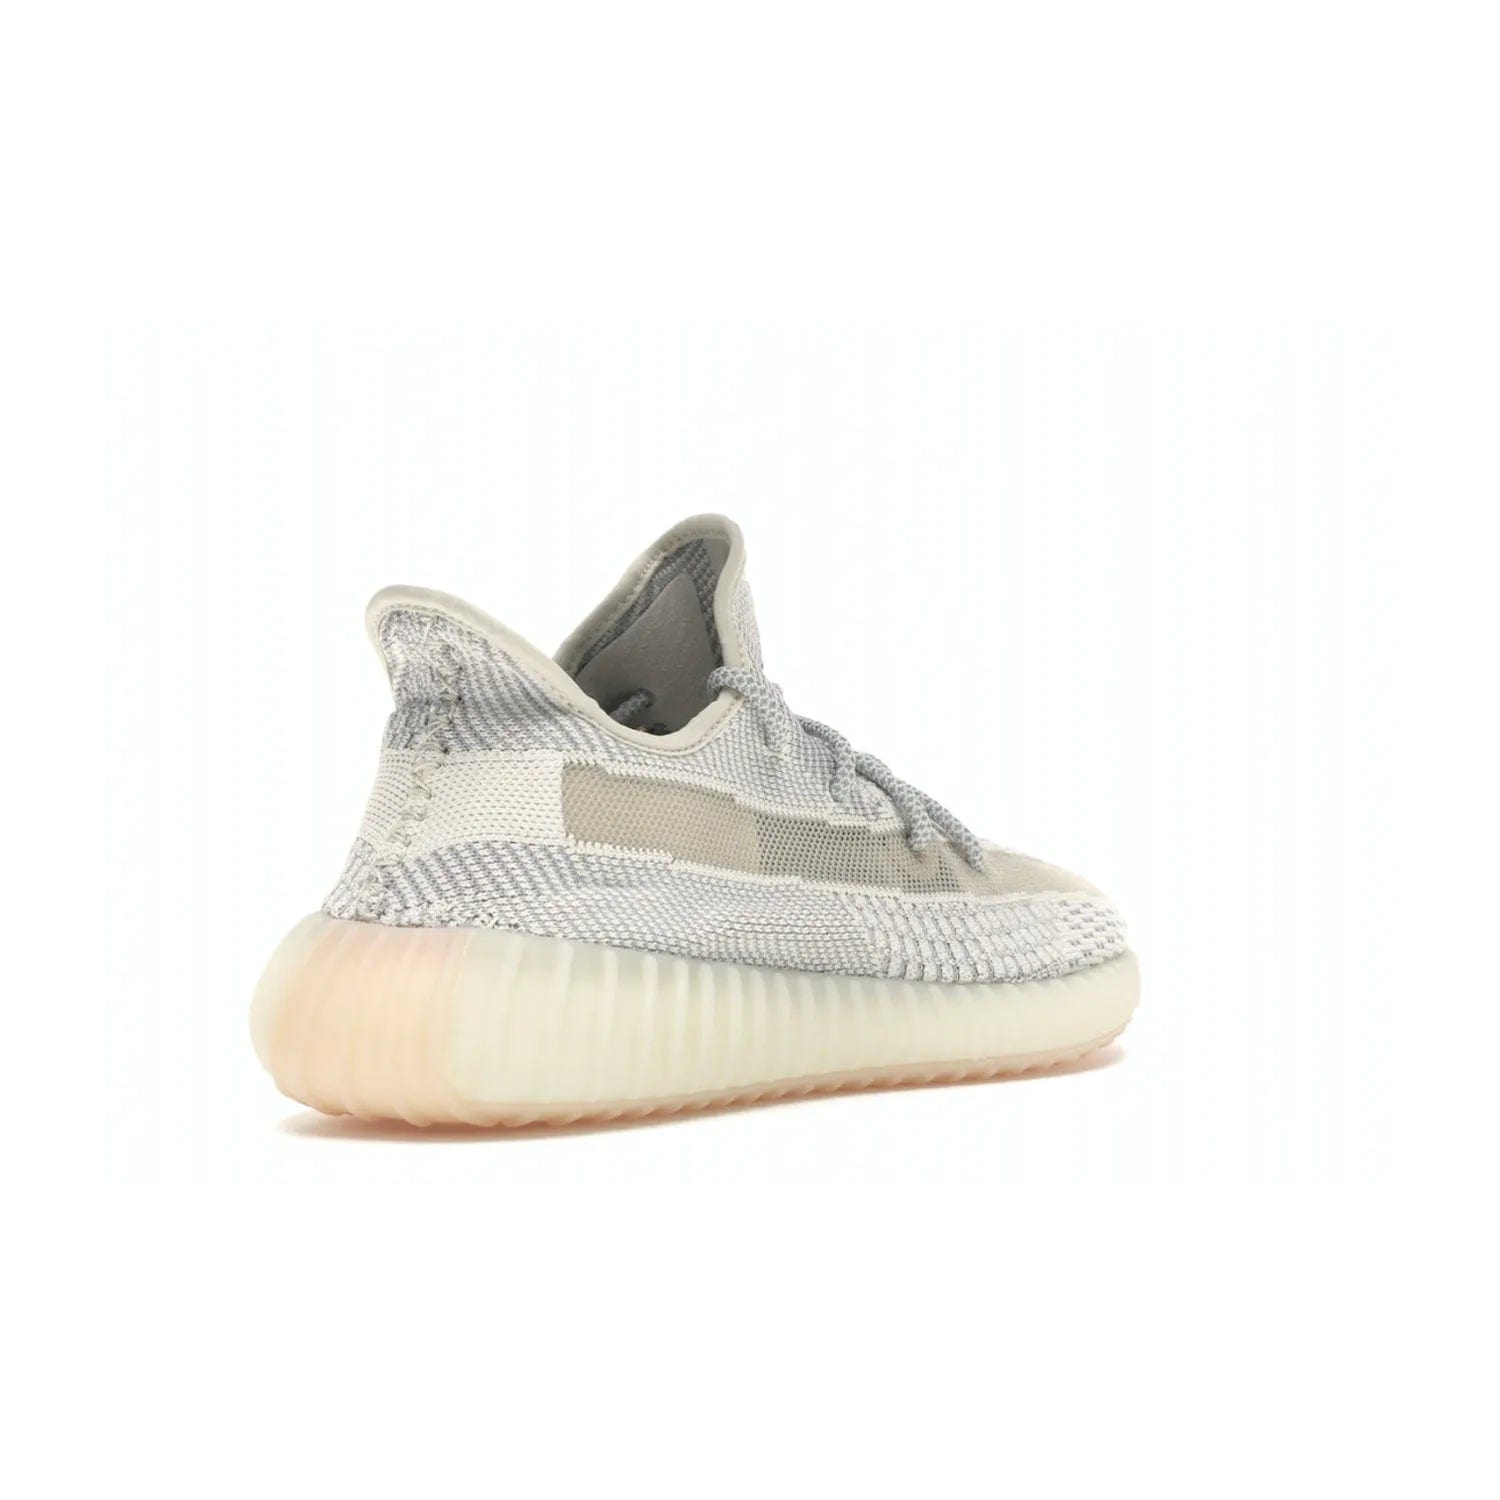 adidas Yeezy Boost 350 V2 Lundmark (Non Reflective) - Image 32 - Only at www.BallersClubKickz.com - Shop the exclusive adidas Yeezy Boost 350 V2 Lundmark with a subtle summer color, mesh upper, white-to-cream transitional midsole, light tan outsole, and pink middle stripe. Comfort and style come together in this perfect summer 350 V2. Released on July 11, 2019.